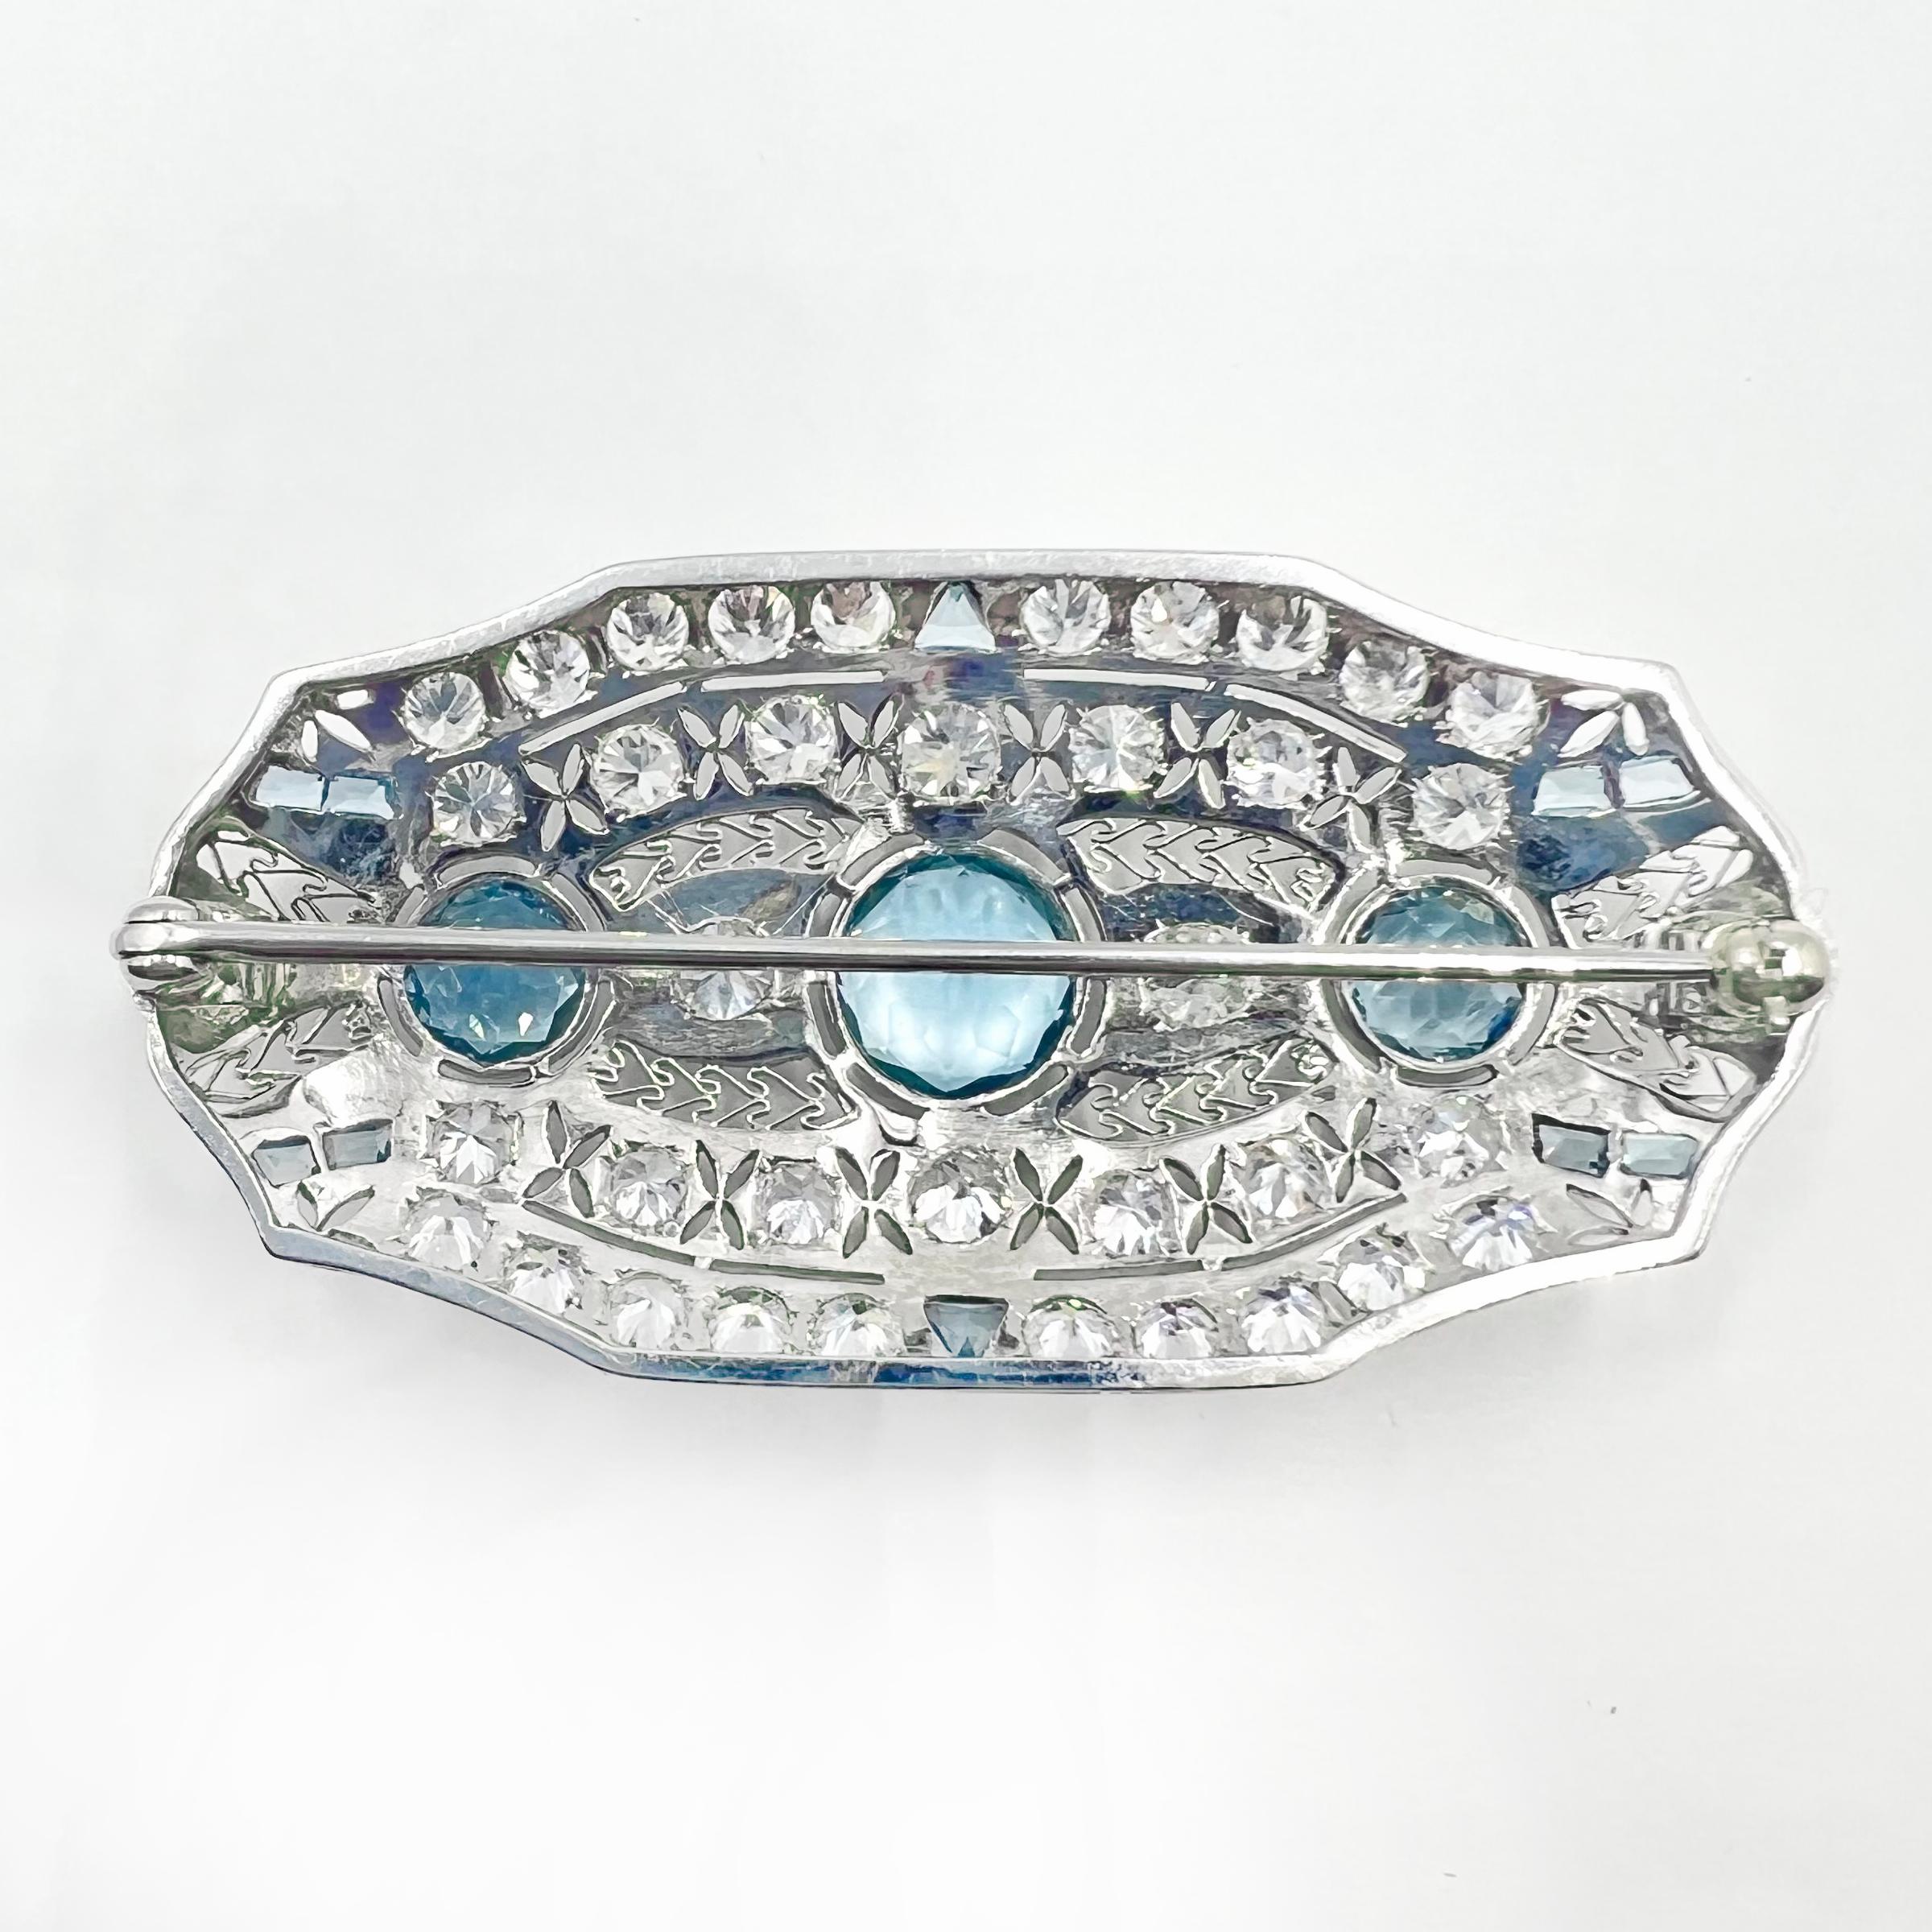 Platinum Aquamarine Diamond Edwardian Brooch Pin In Excellent Condition For Sale In Palm Beach, FL